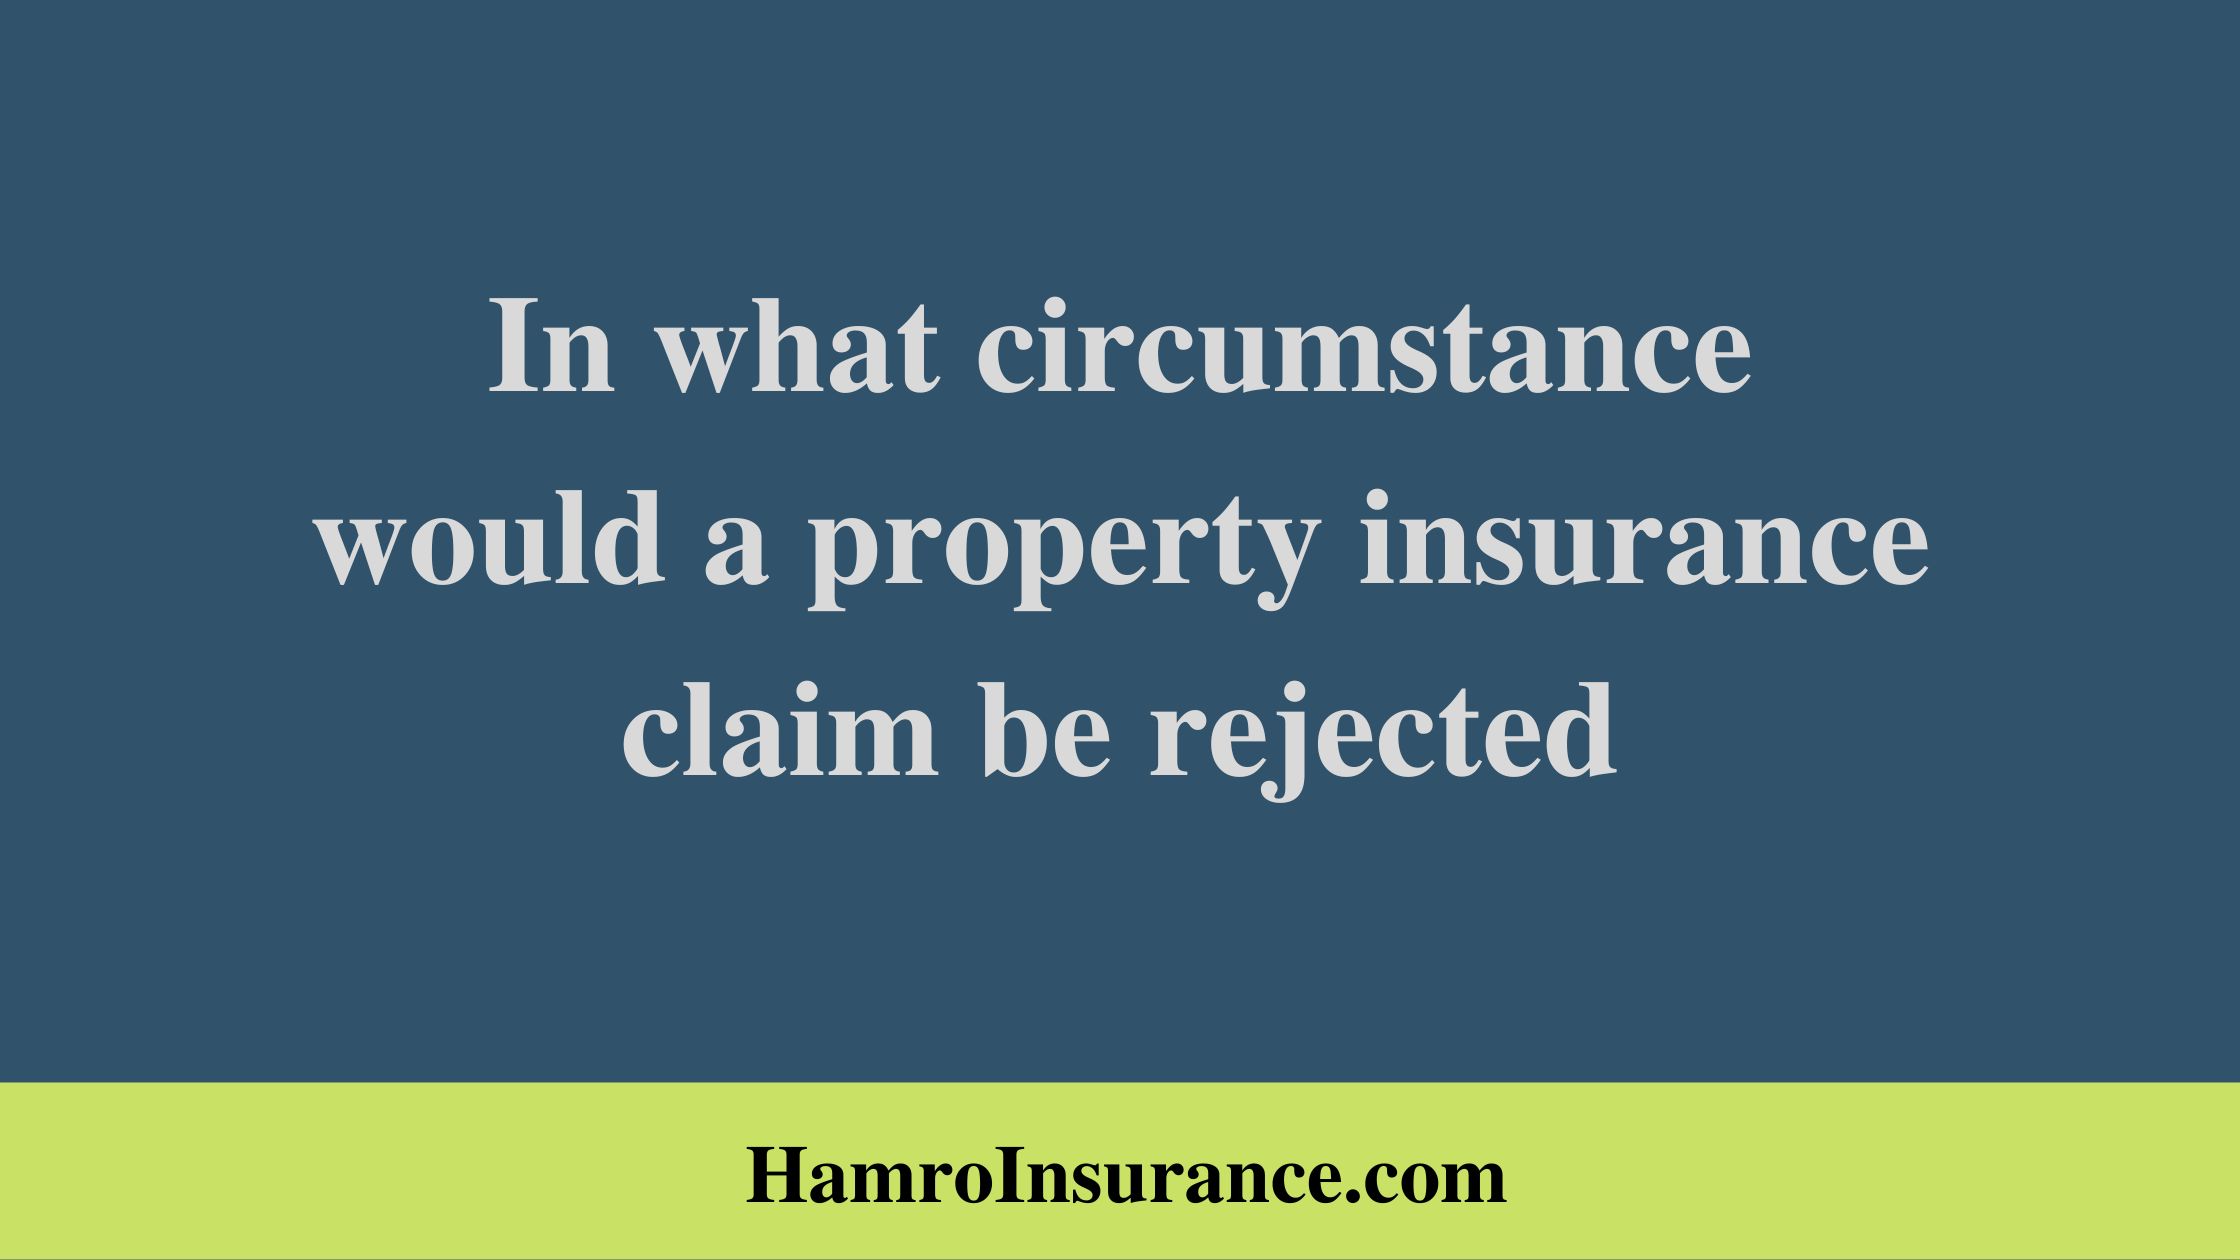 In what circumstance would a property insurance claim be rejected